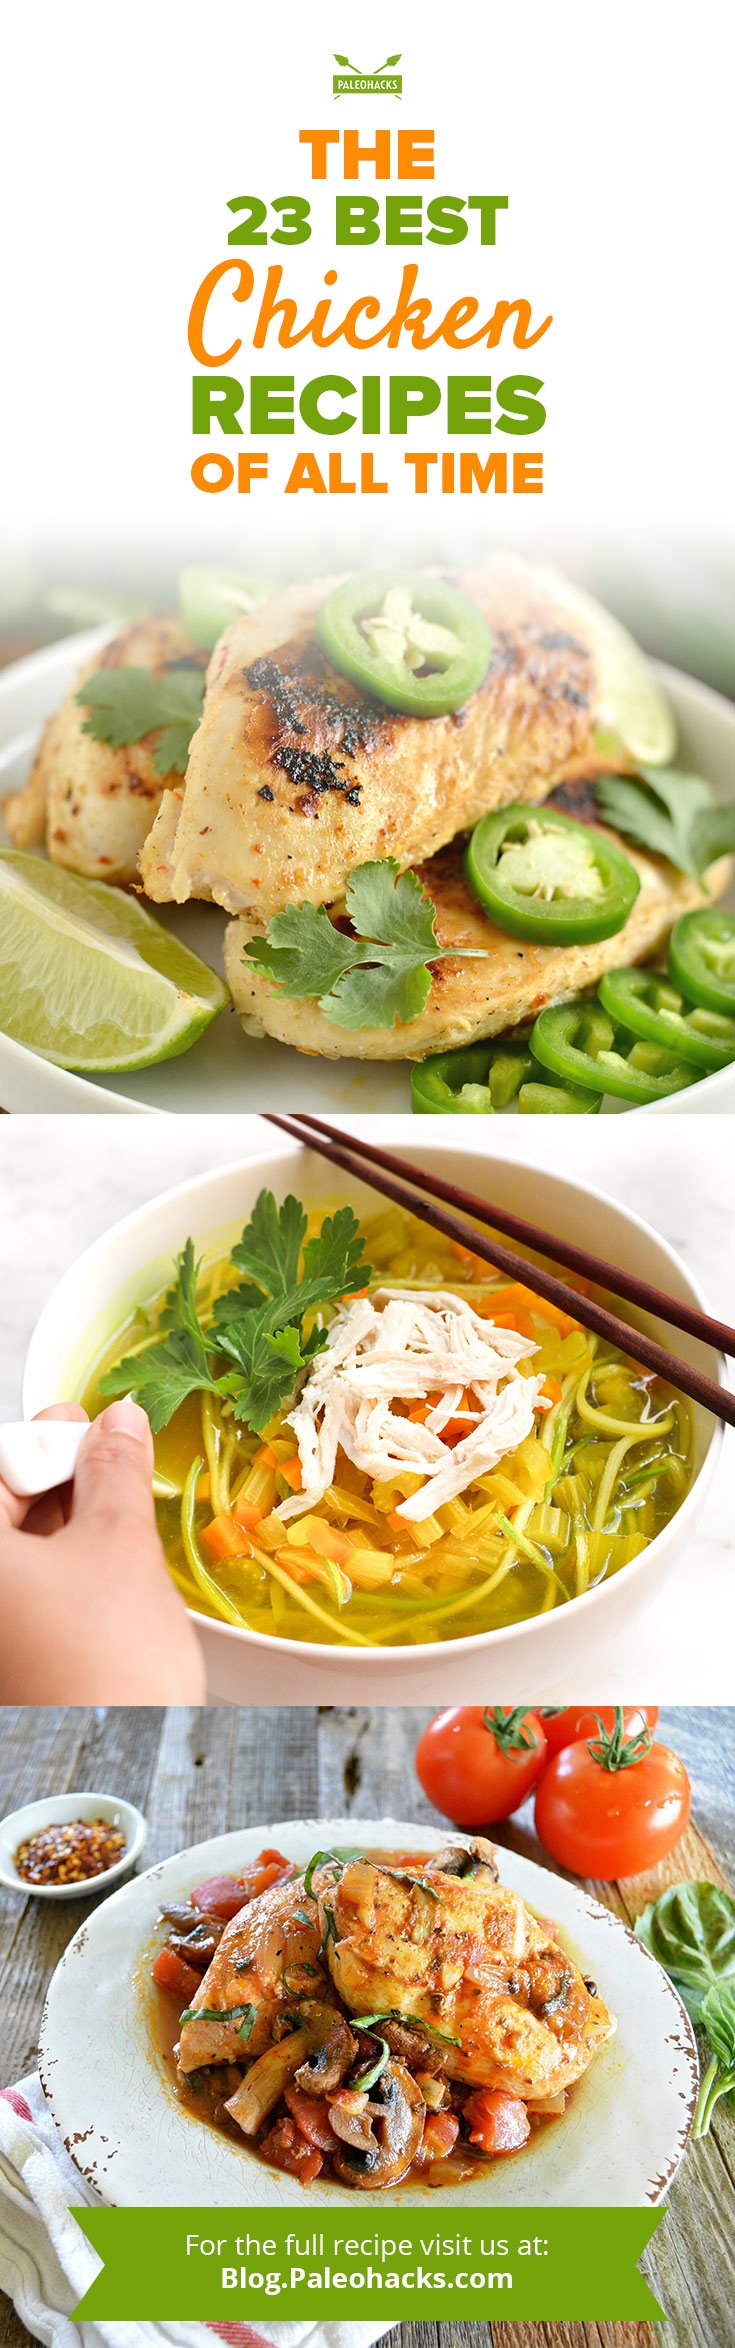 Chicken is one of the most versatile Paleo foods. Try one of these fantastic chicken recipes to expand your horizons with soups, skillets and comfort meals.